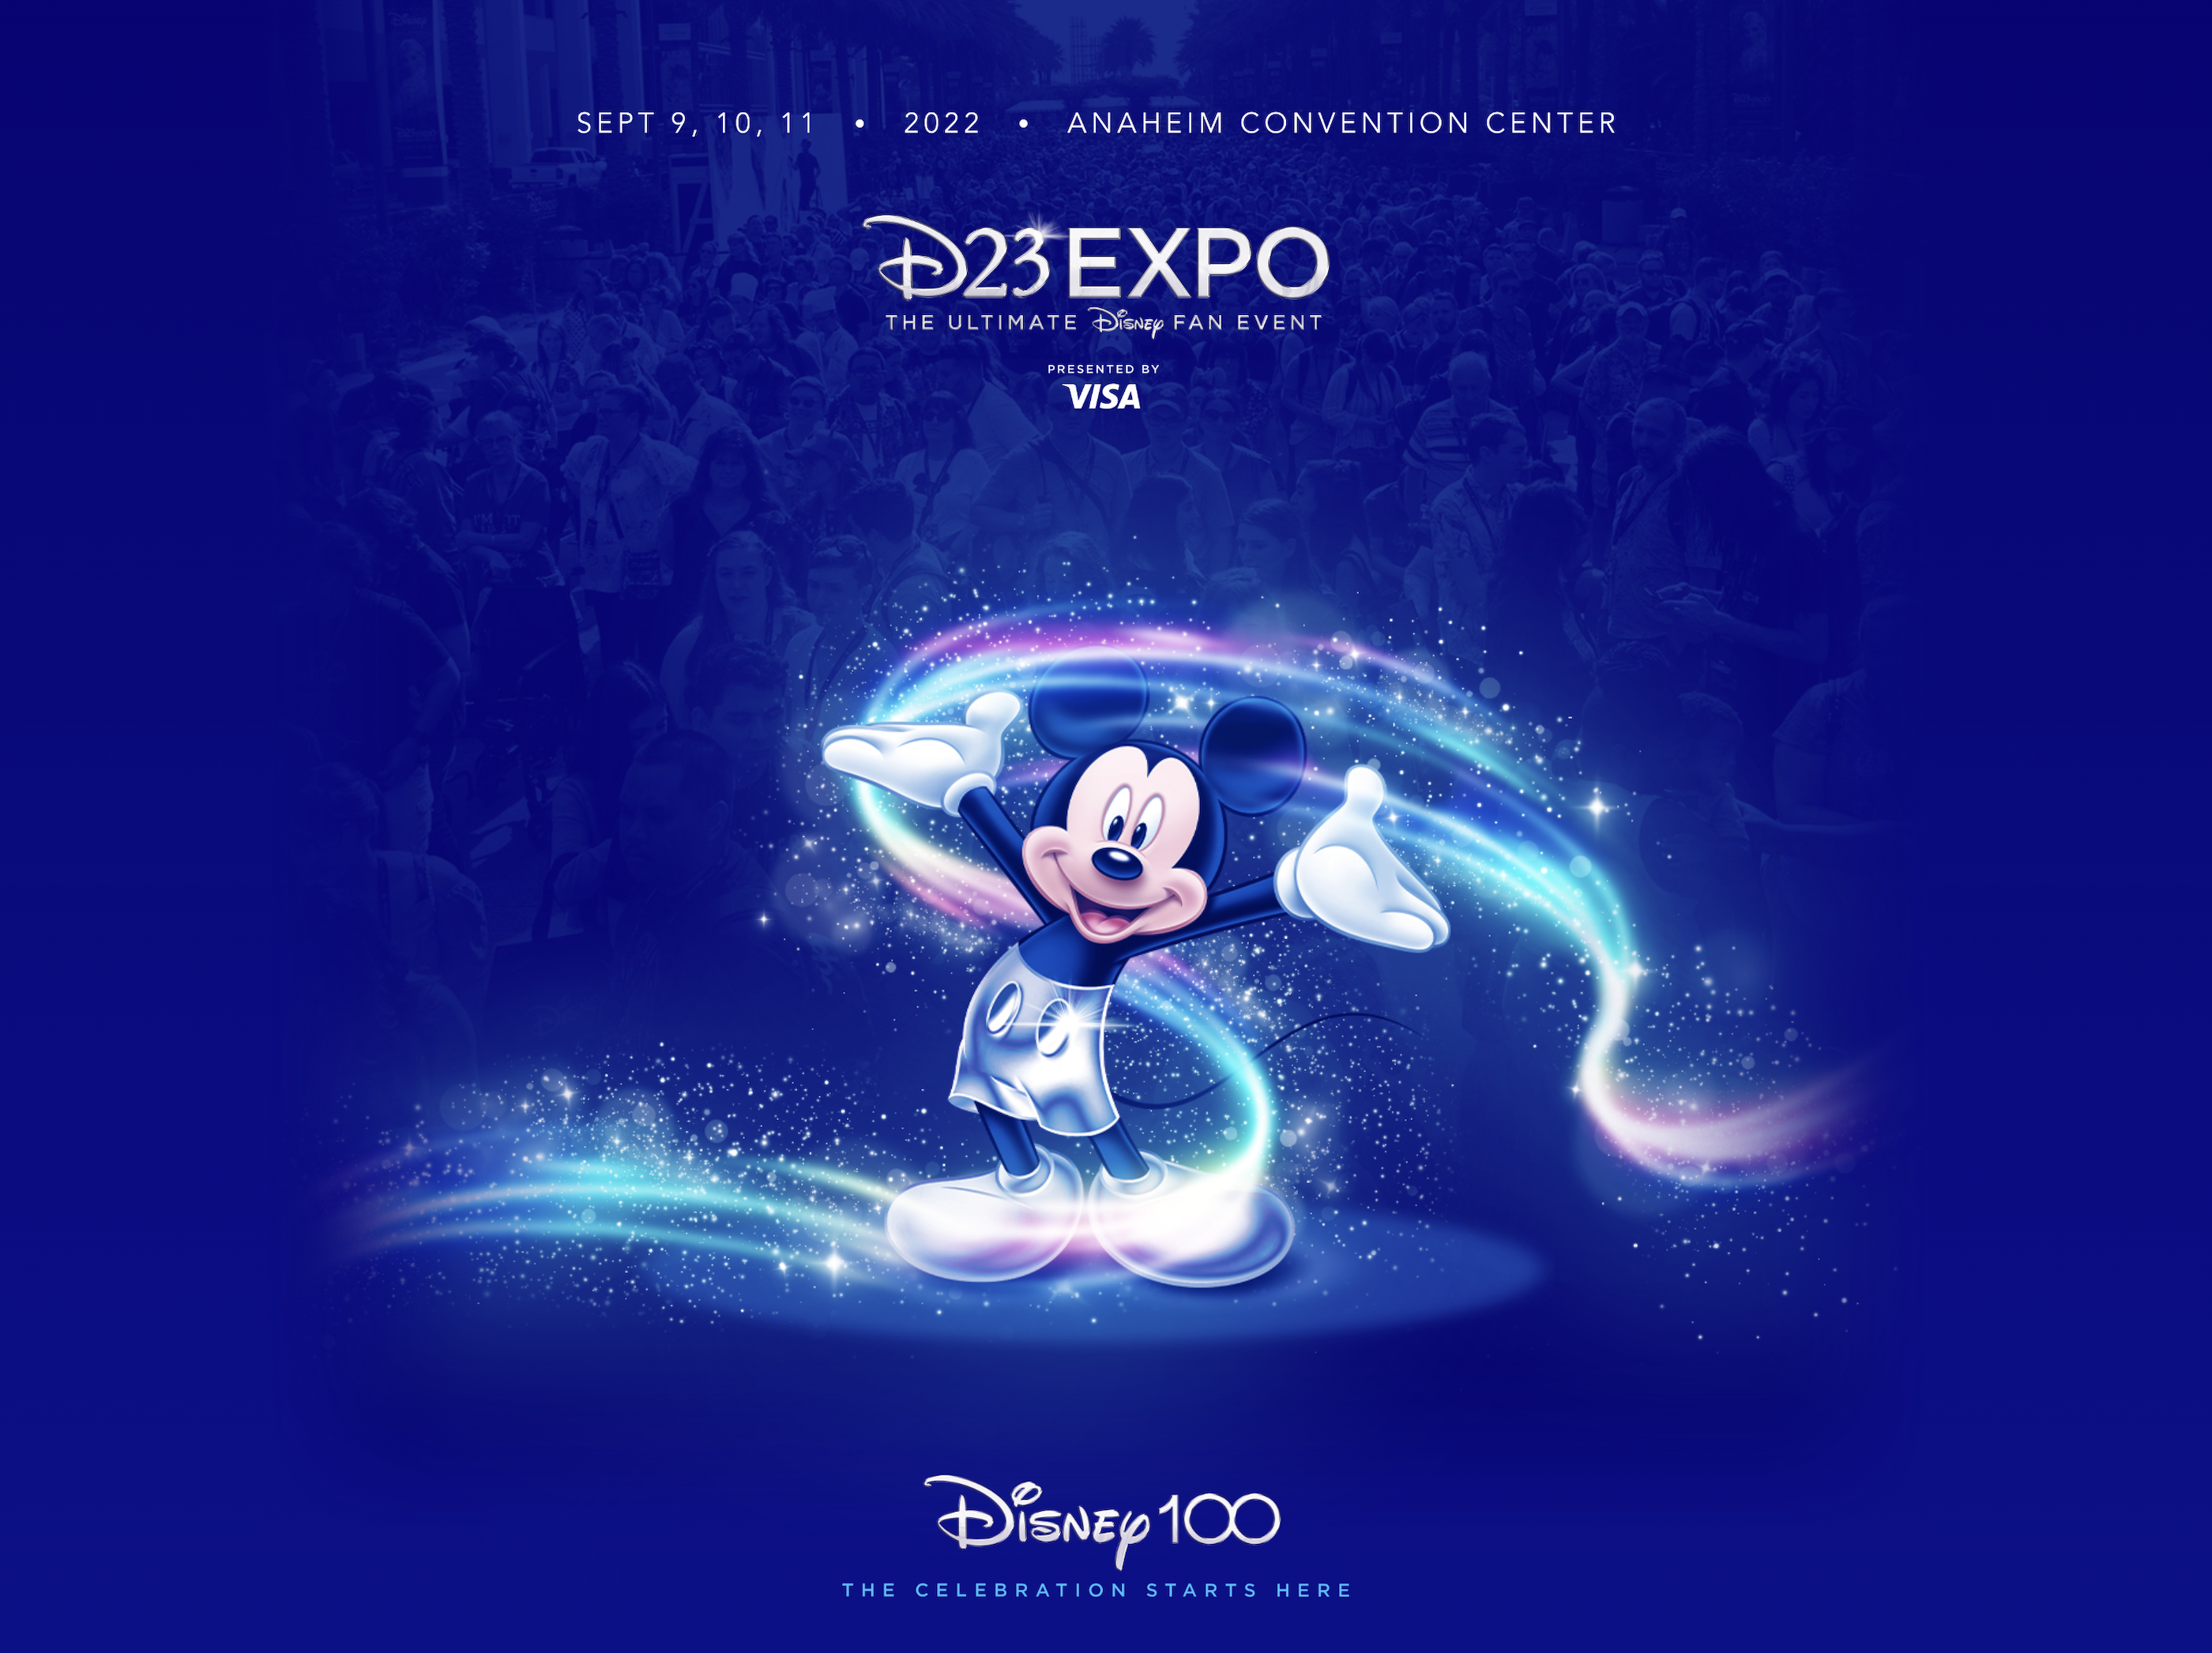 D23 Expo 2022: Everything You Need To Know - DVC Shop